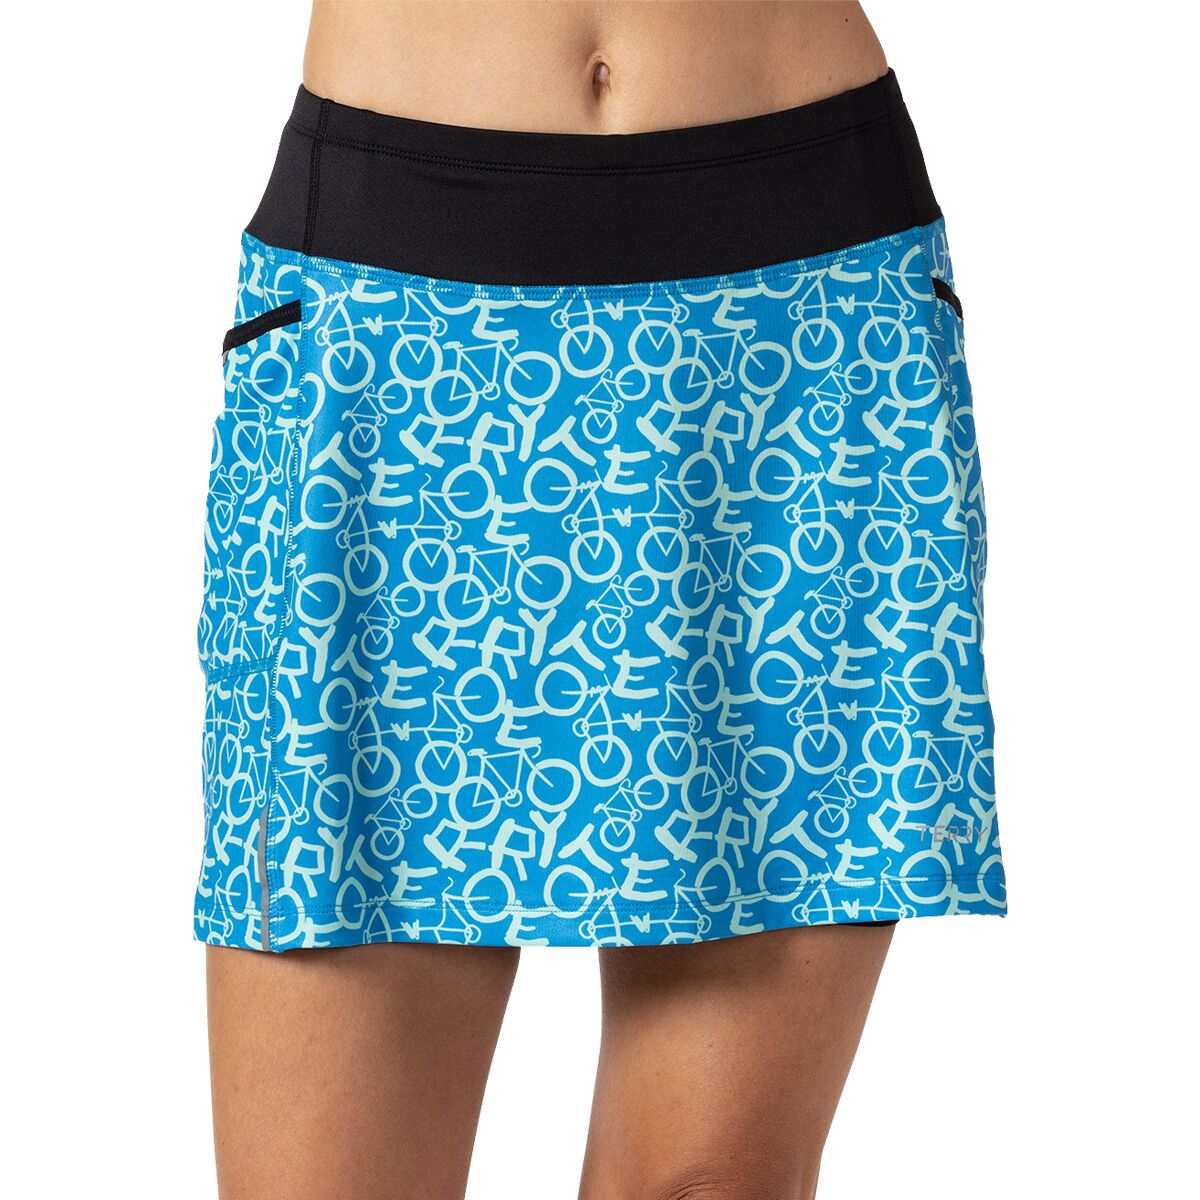 Terry Bicycles Trixie Skort - Women's Cyclo Blue, S